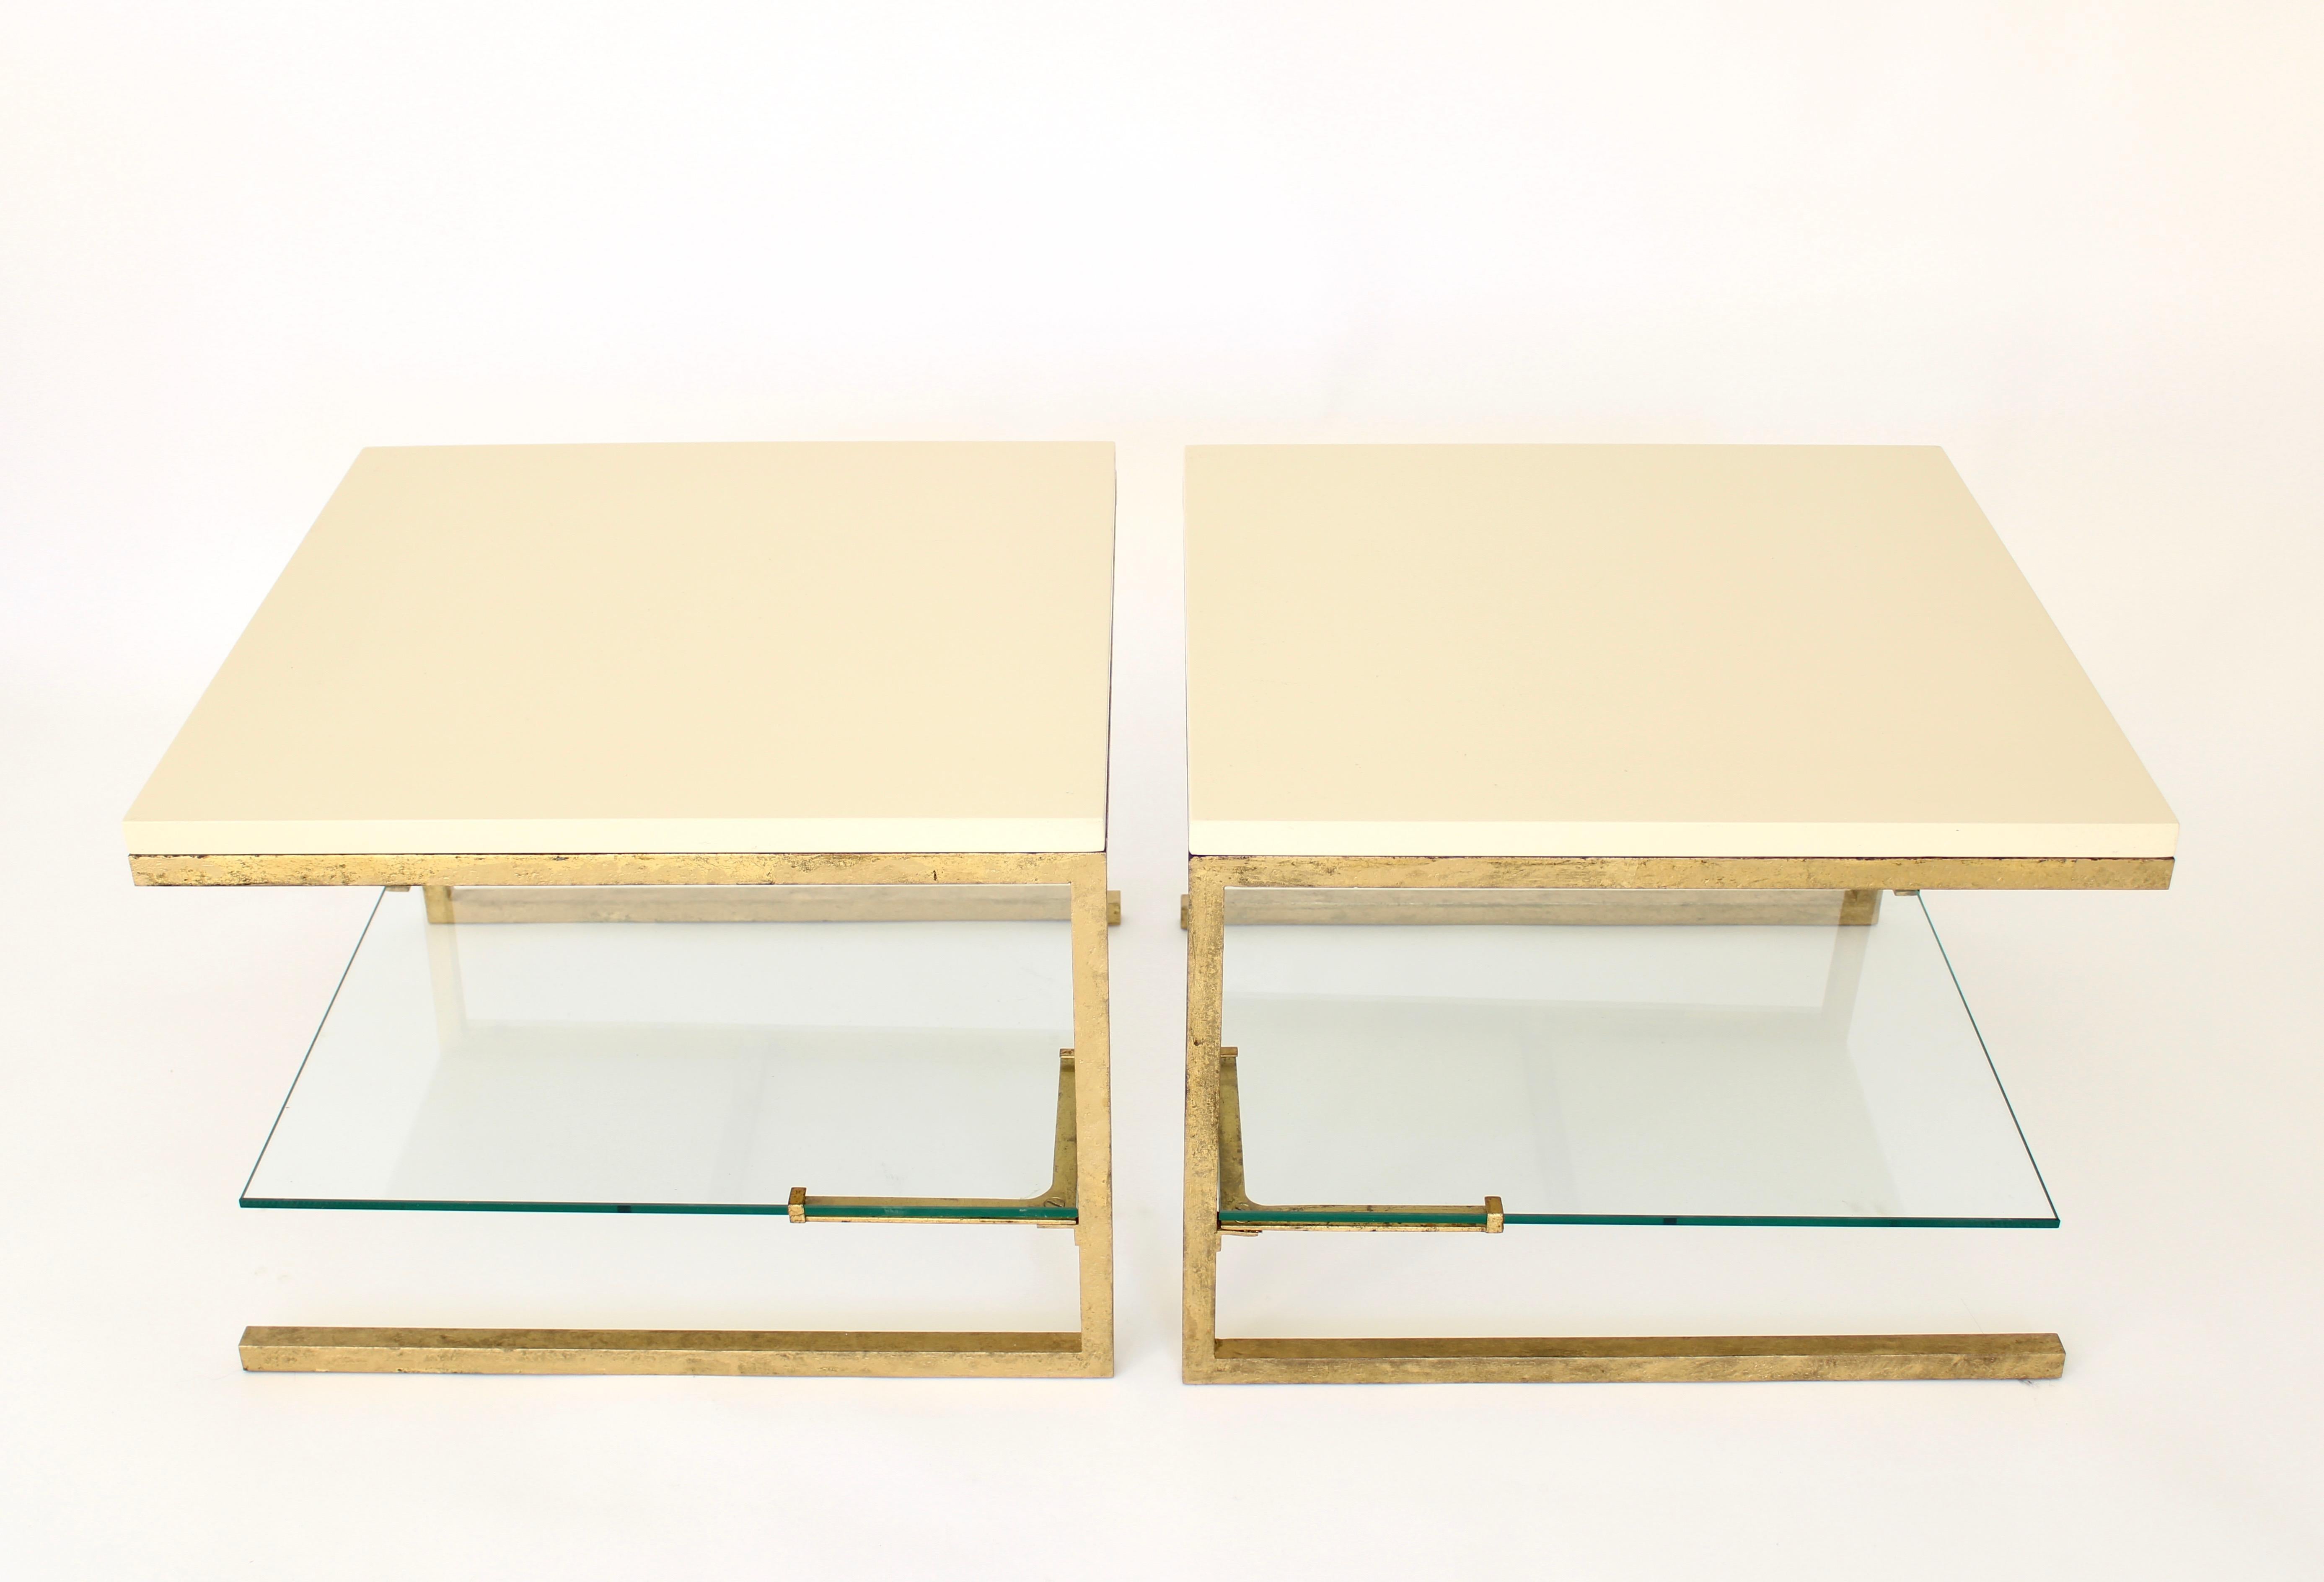 Pair of French Maison Ramsay side tables with cream or ivory color lacquered tops set on gilded iron frames with a semi floating glass second shelf.
The lacquered plateau is 1